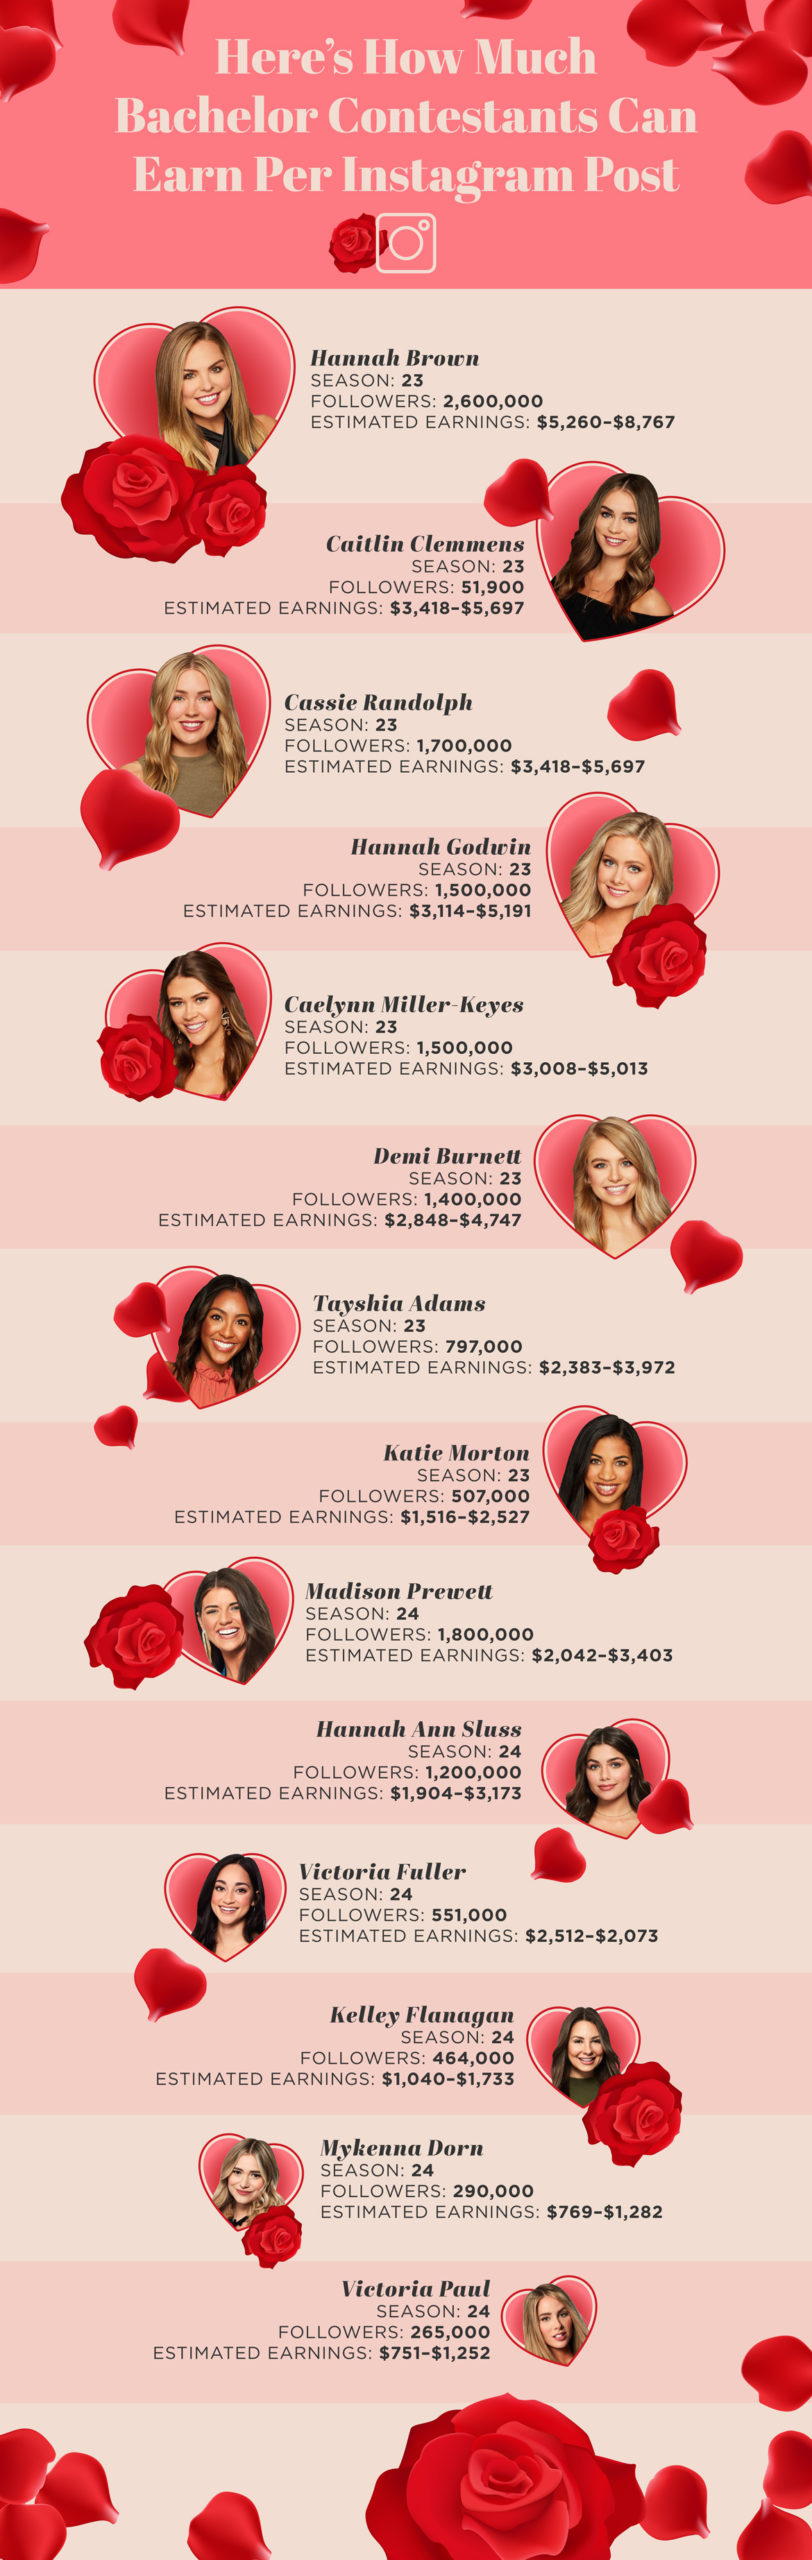 How Much Do Bachelor Influencers Make?